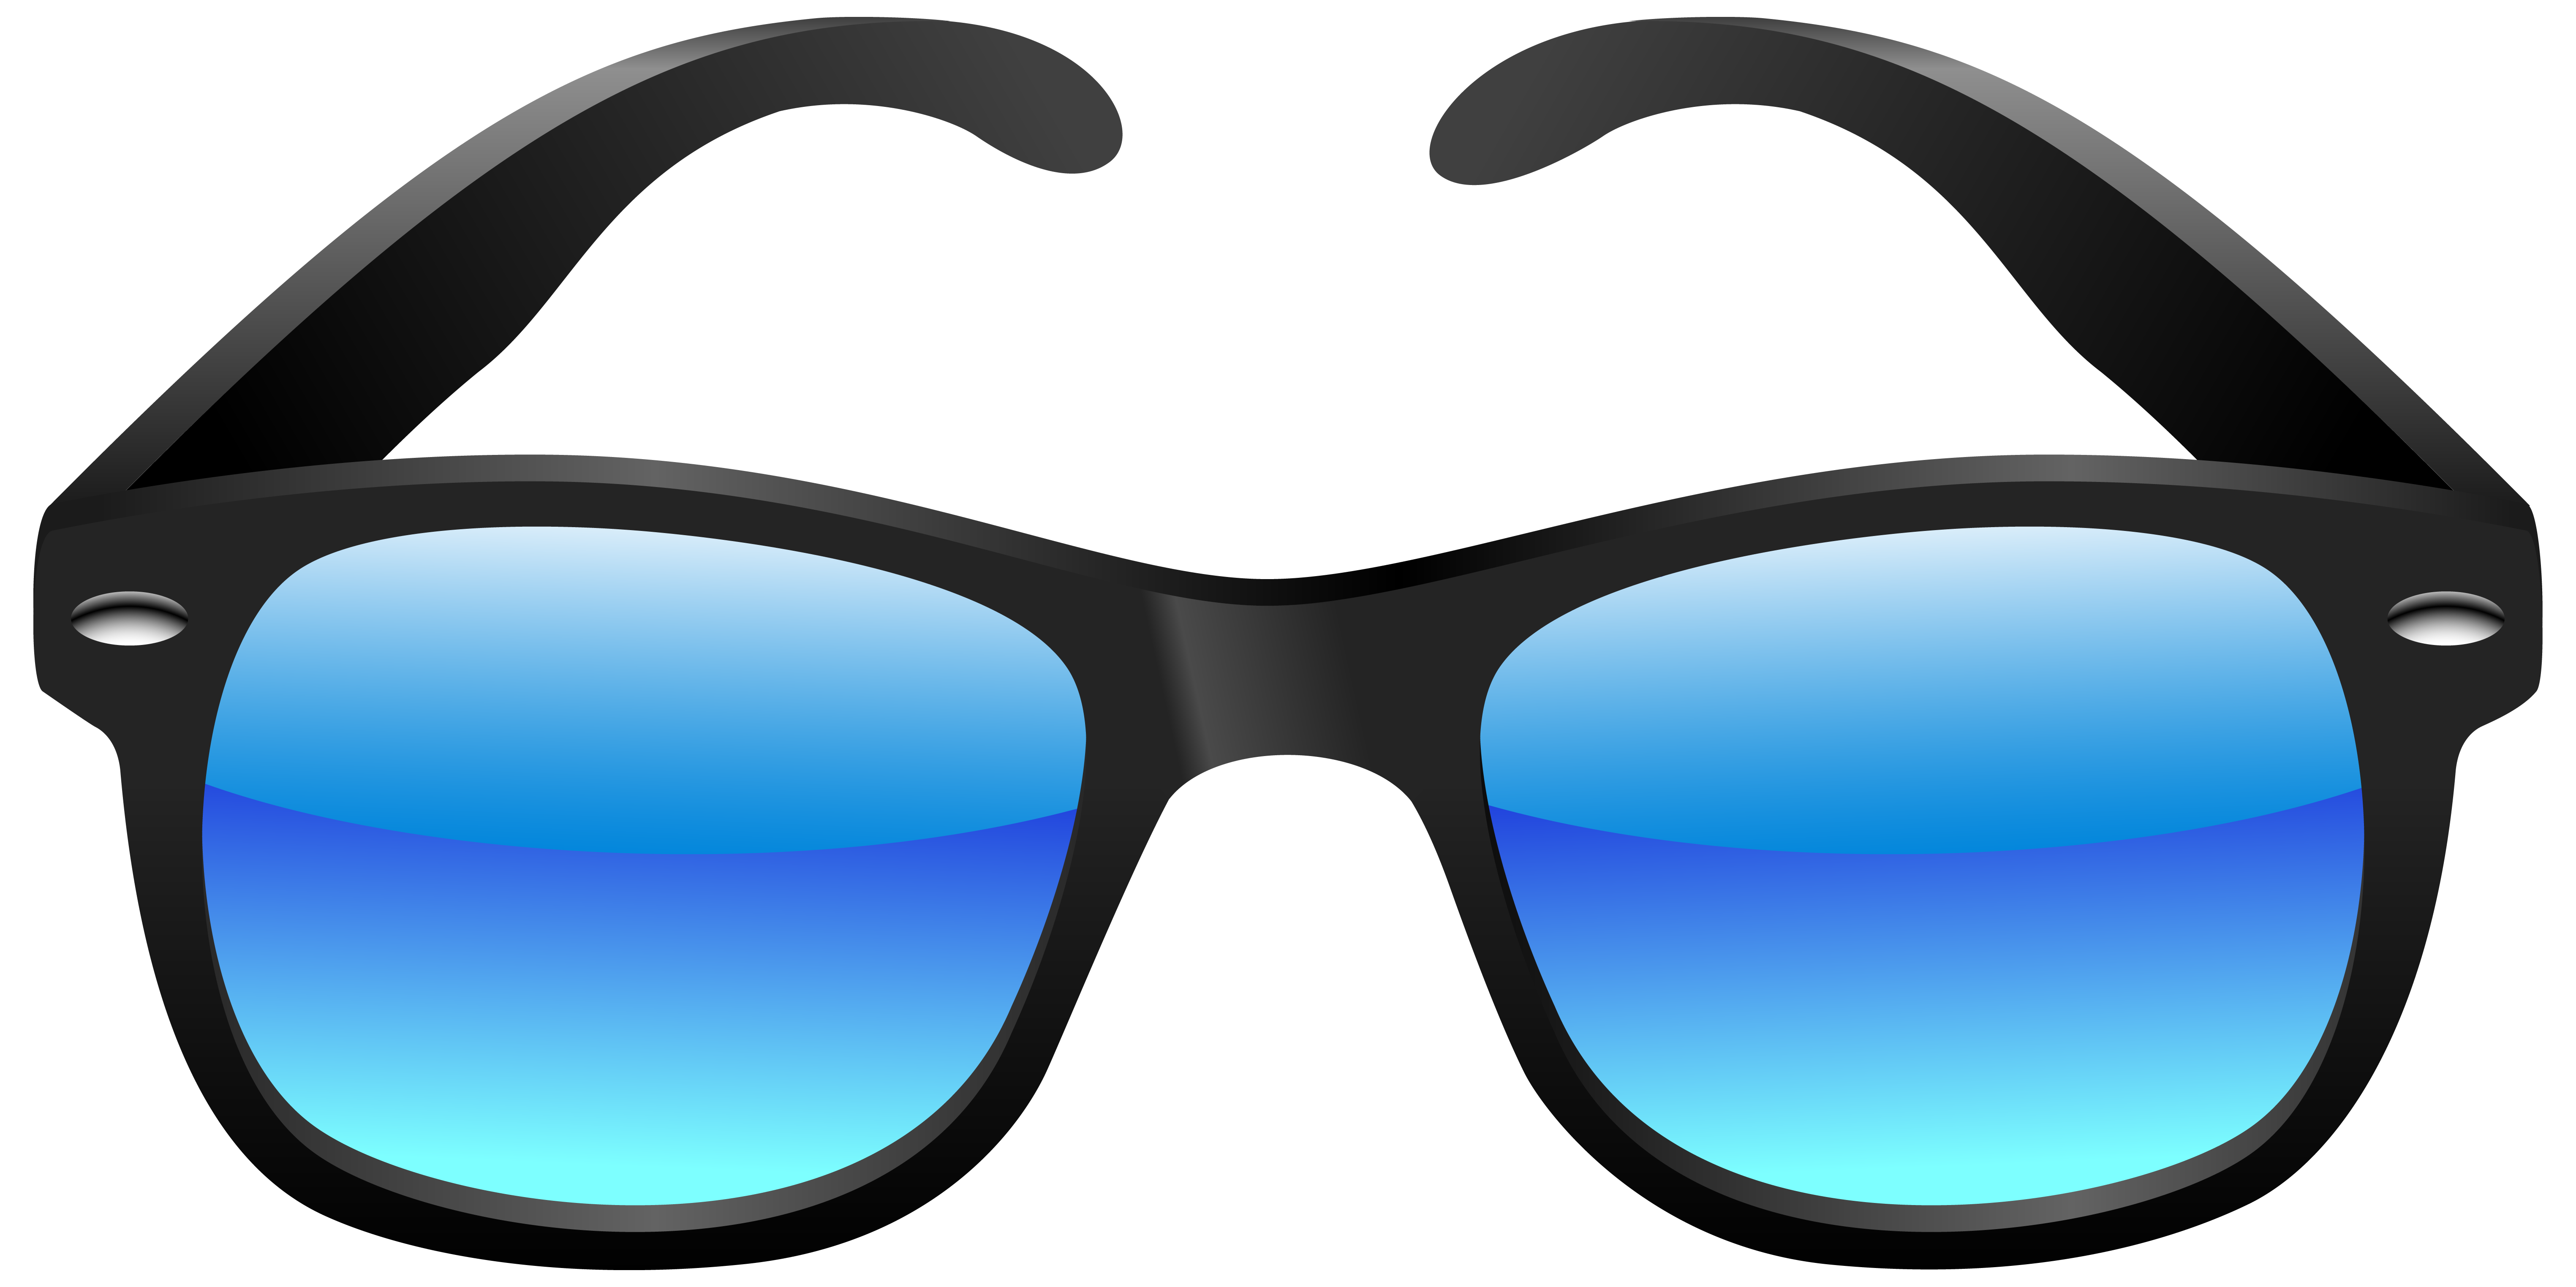 Black and blue sunglasses clipart image